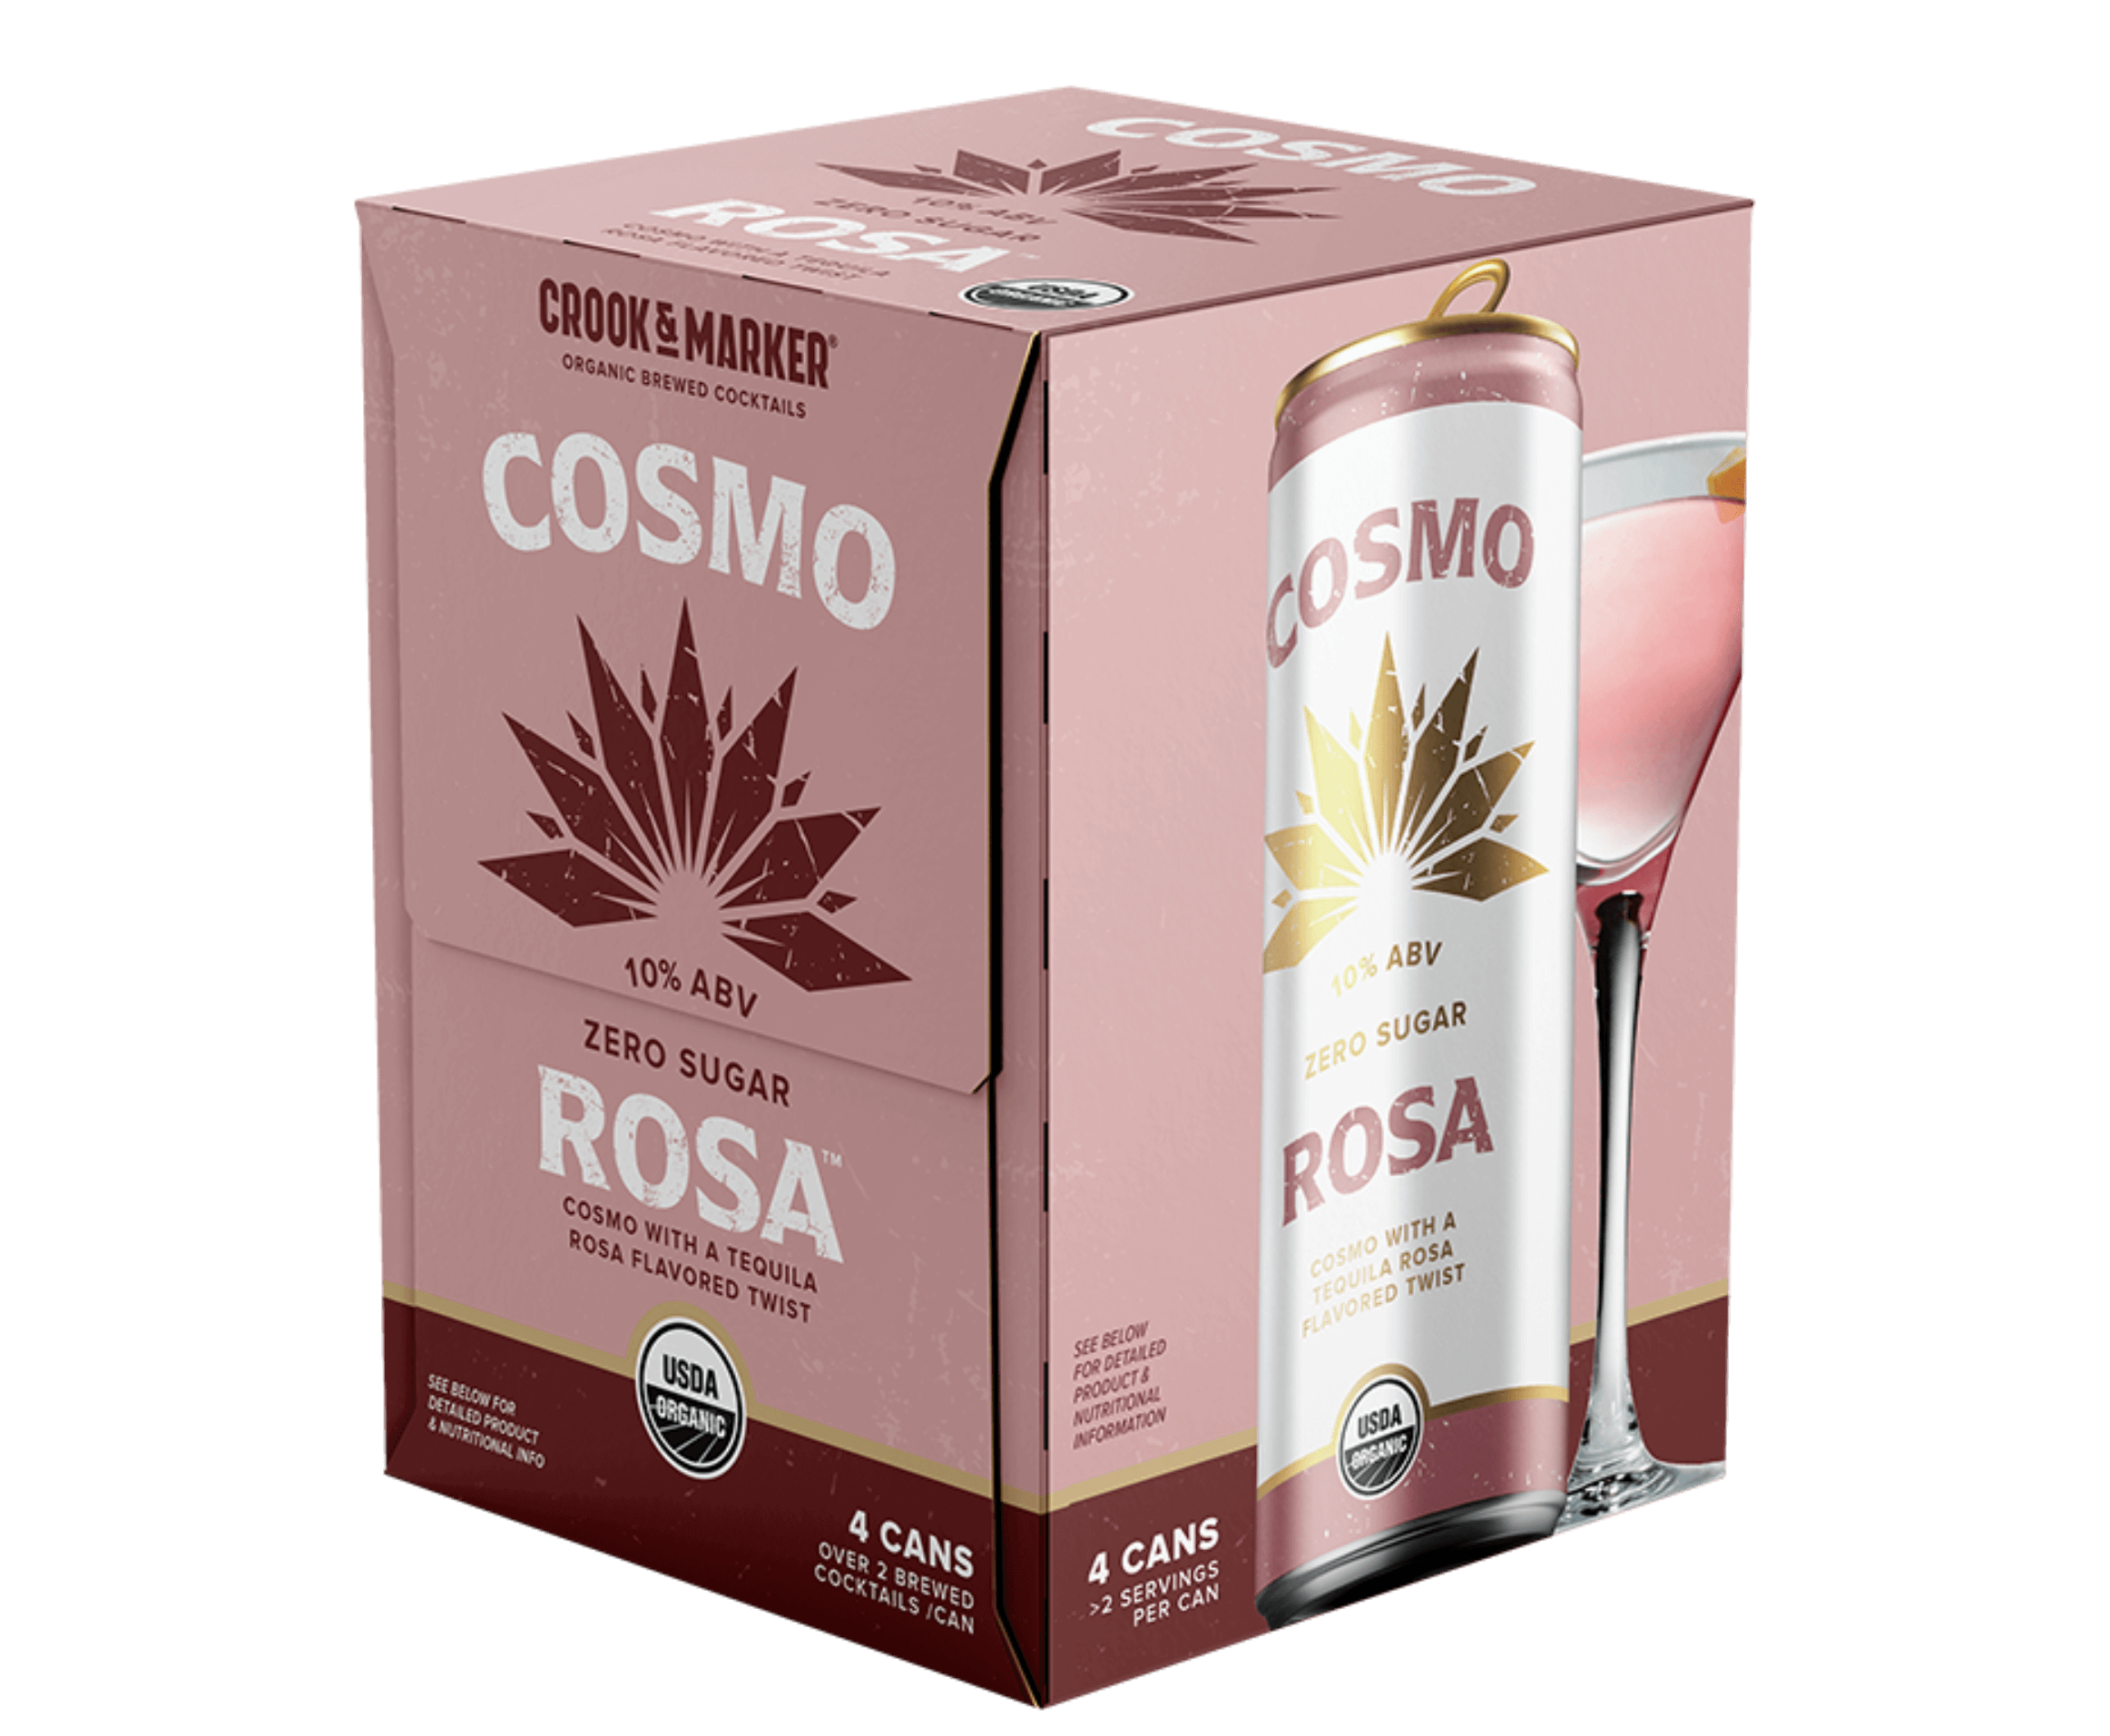 Crook & Marker - Cosmo Rosa 4 Pack Box